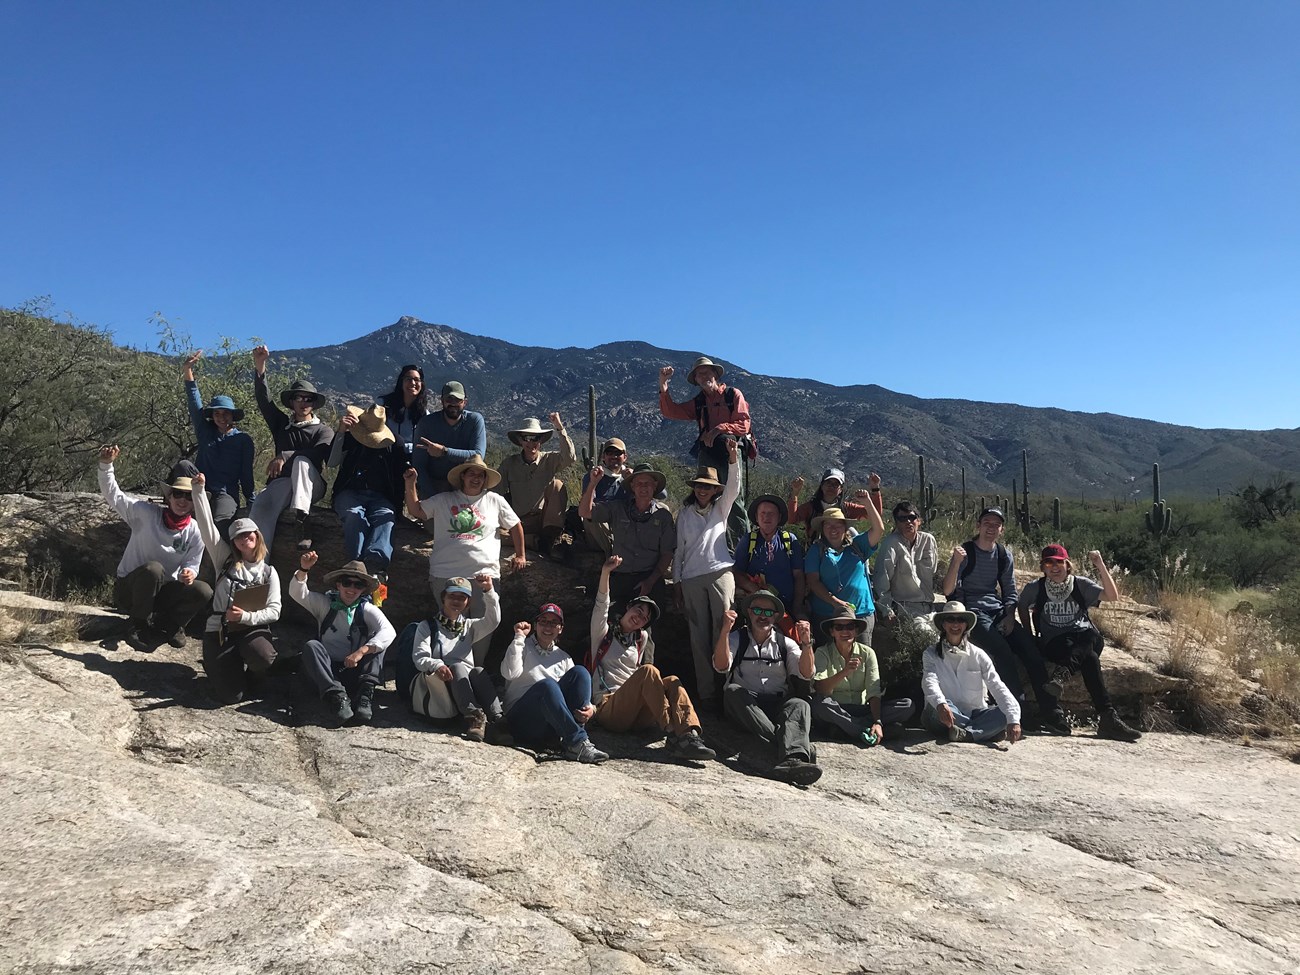 Friends of Dale and Carianne's group photo after participating at the 2020 saguaro census